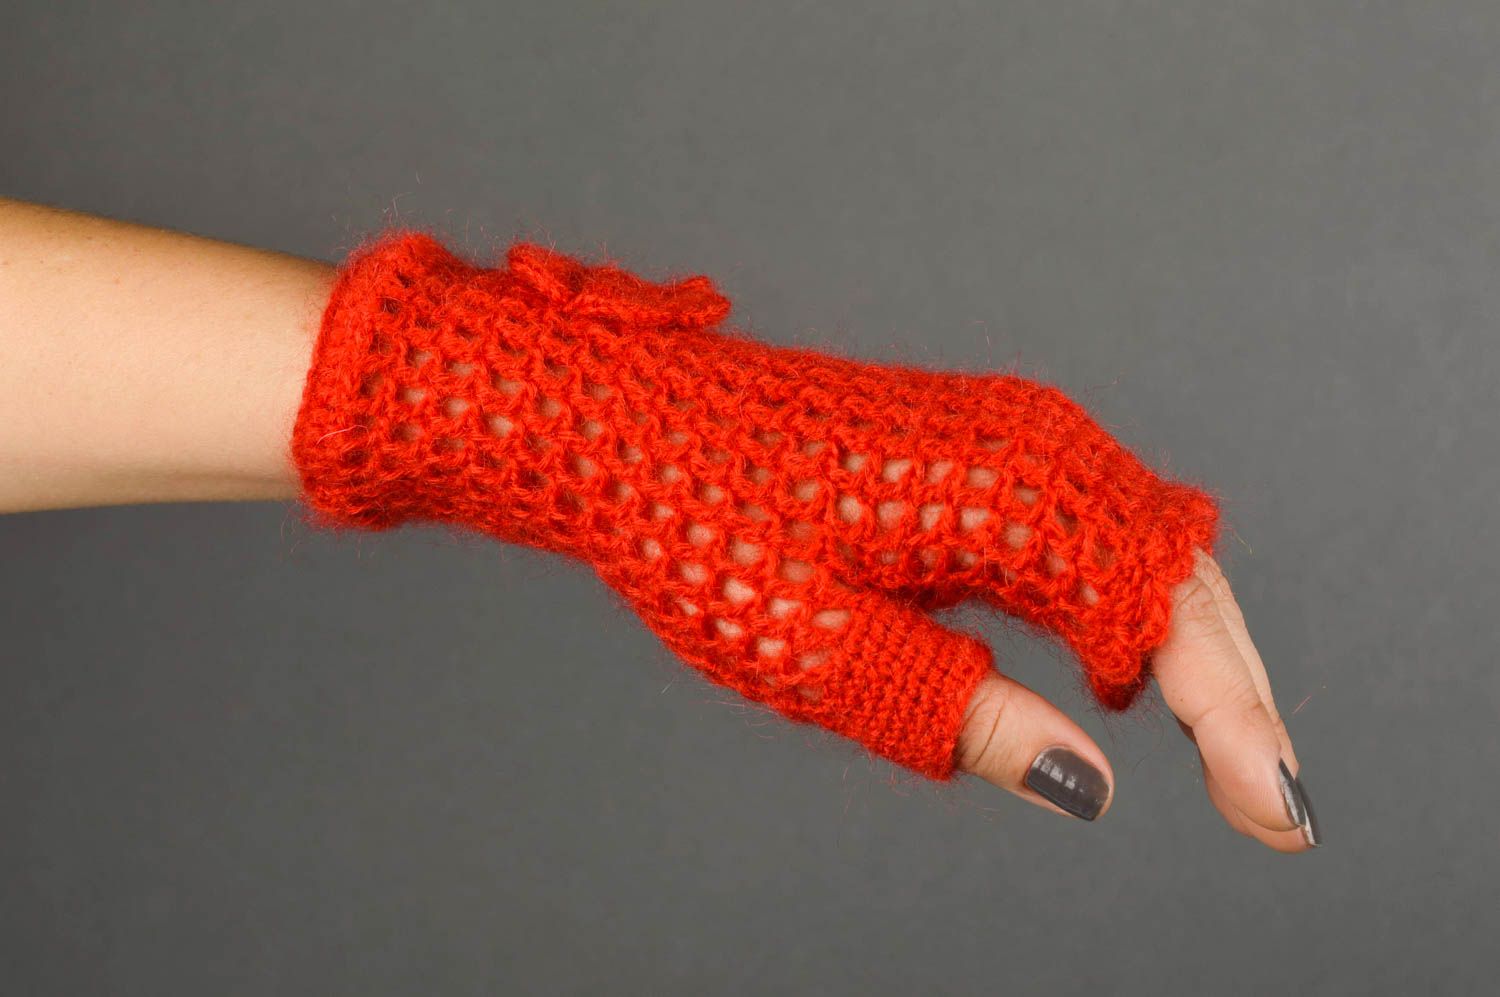 Handmade crocheted mitts unusual red mitts female winter accessory cute gift photo 2